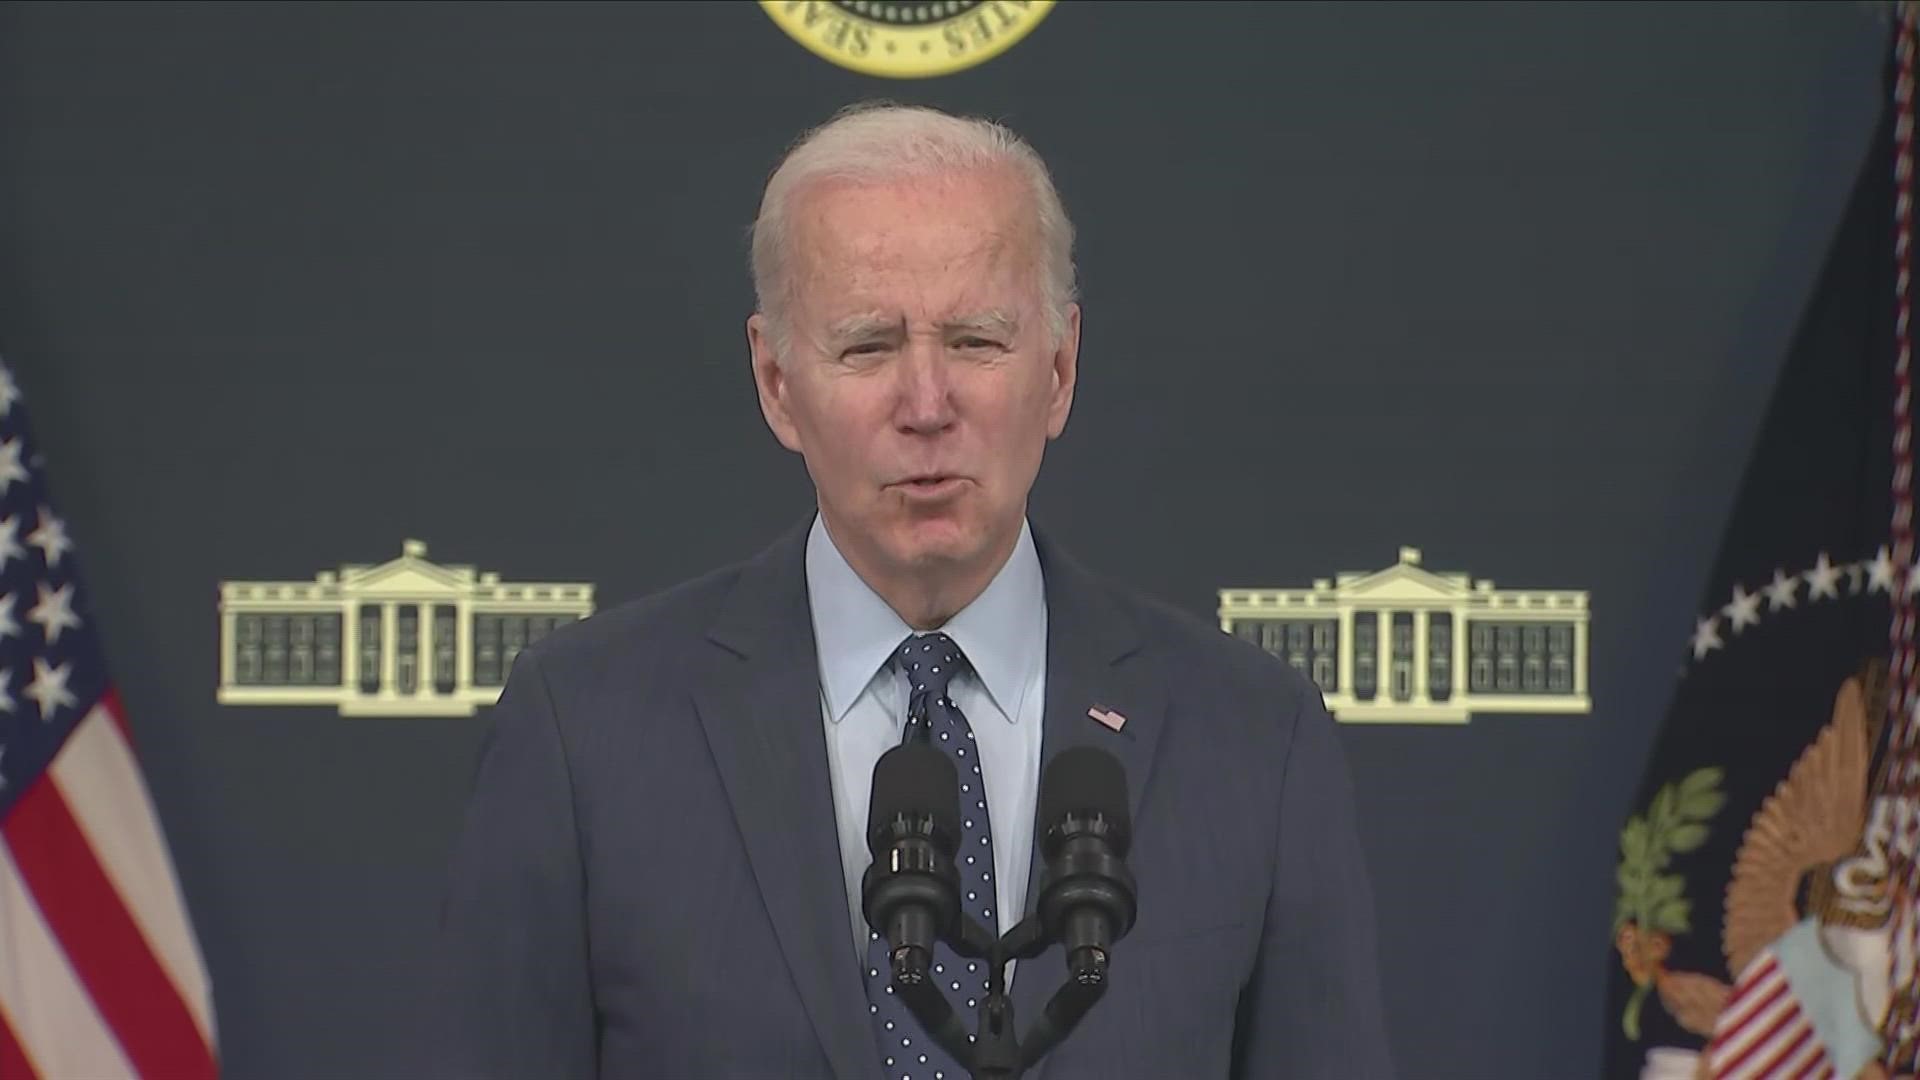 Biden gave his most extensive remarks on the unidentified aerial objects shot down in the last few weeks.